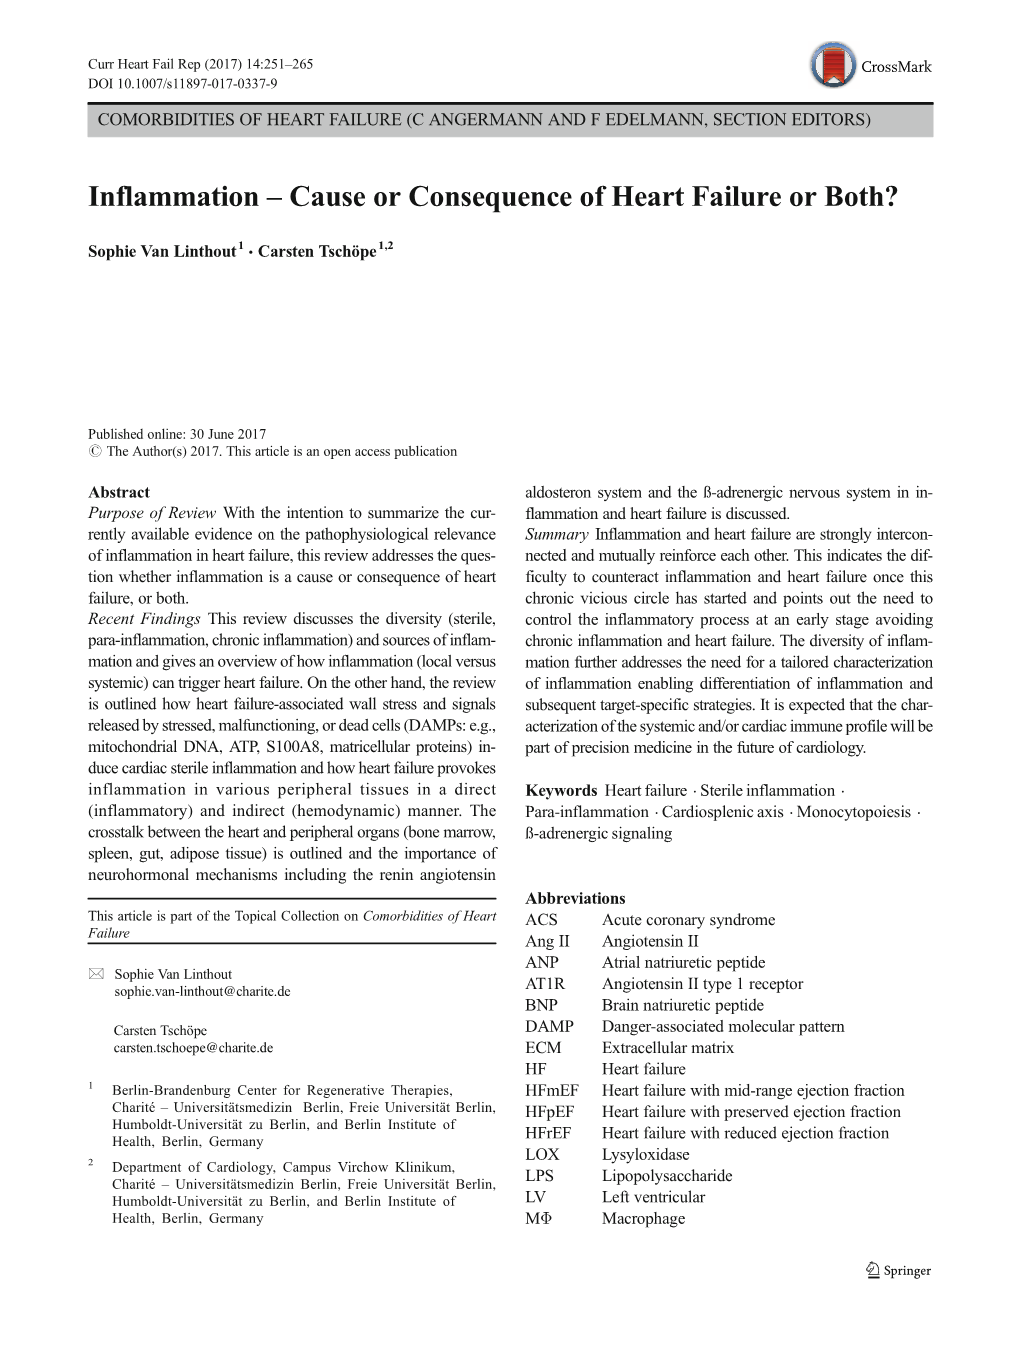 Cause Or Consequence of Heart Failure Or Both?